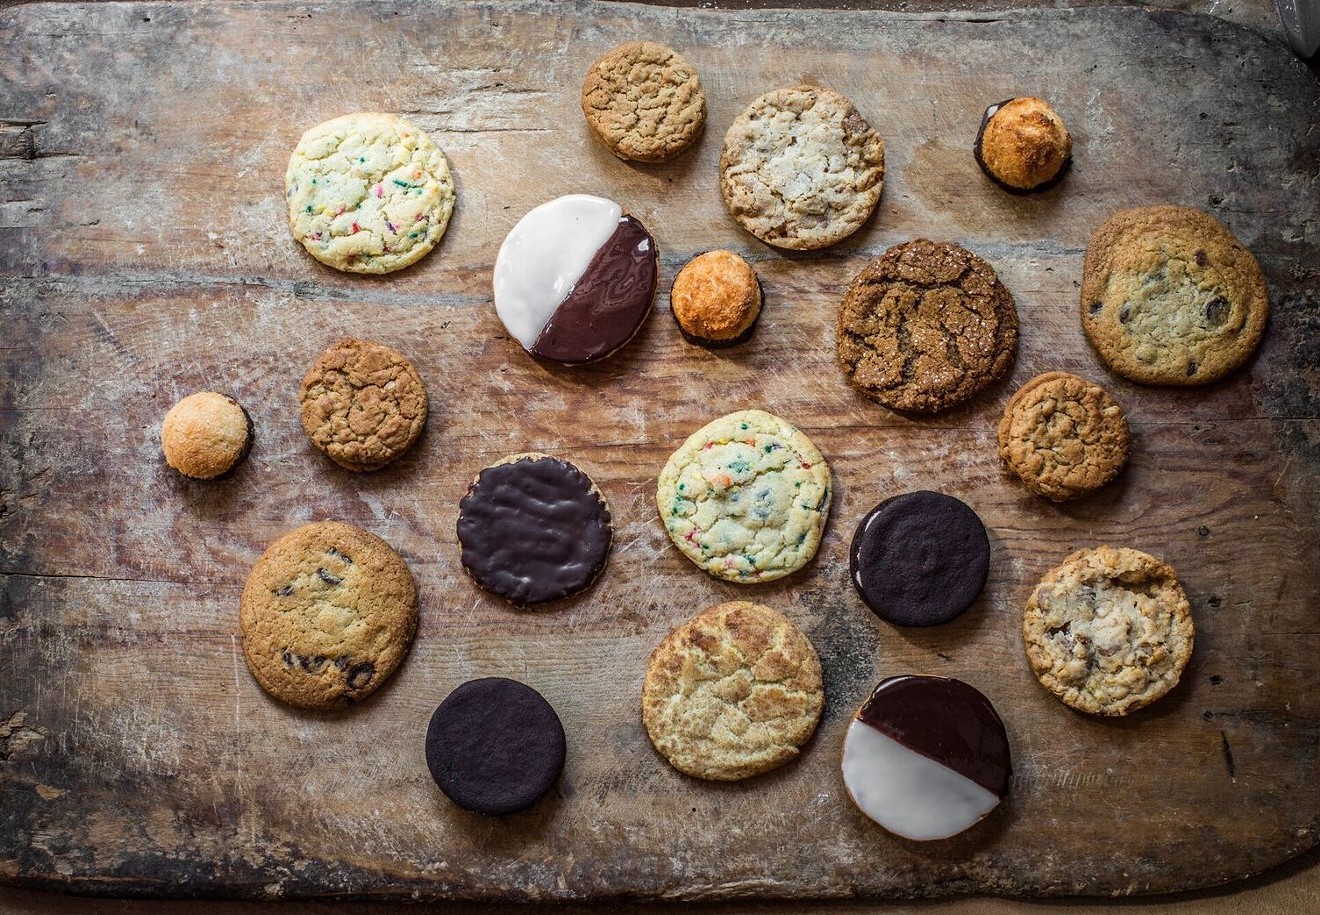 Sweet dreams are made of cookies from Fluff Bake Bar.